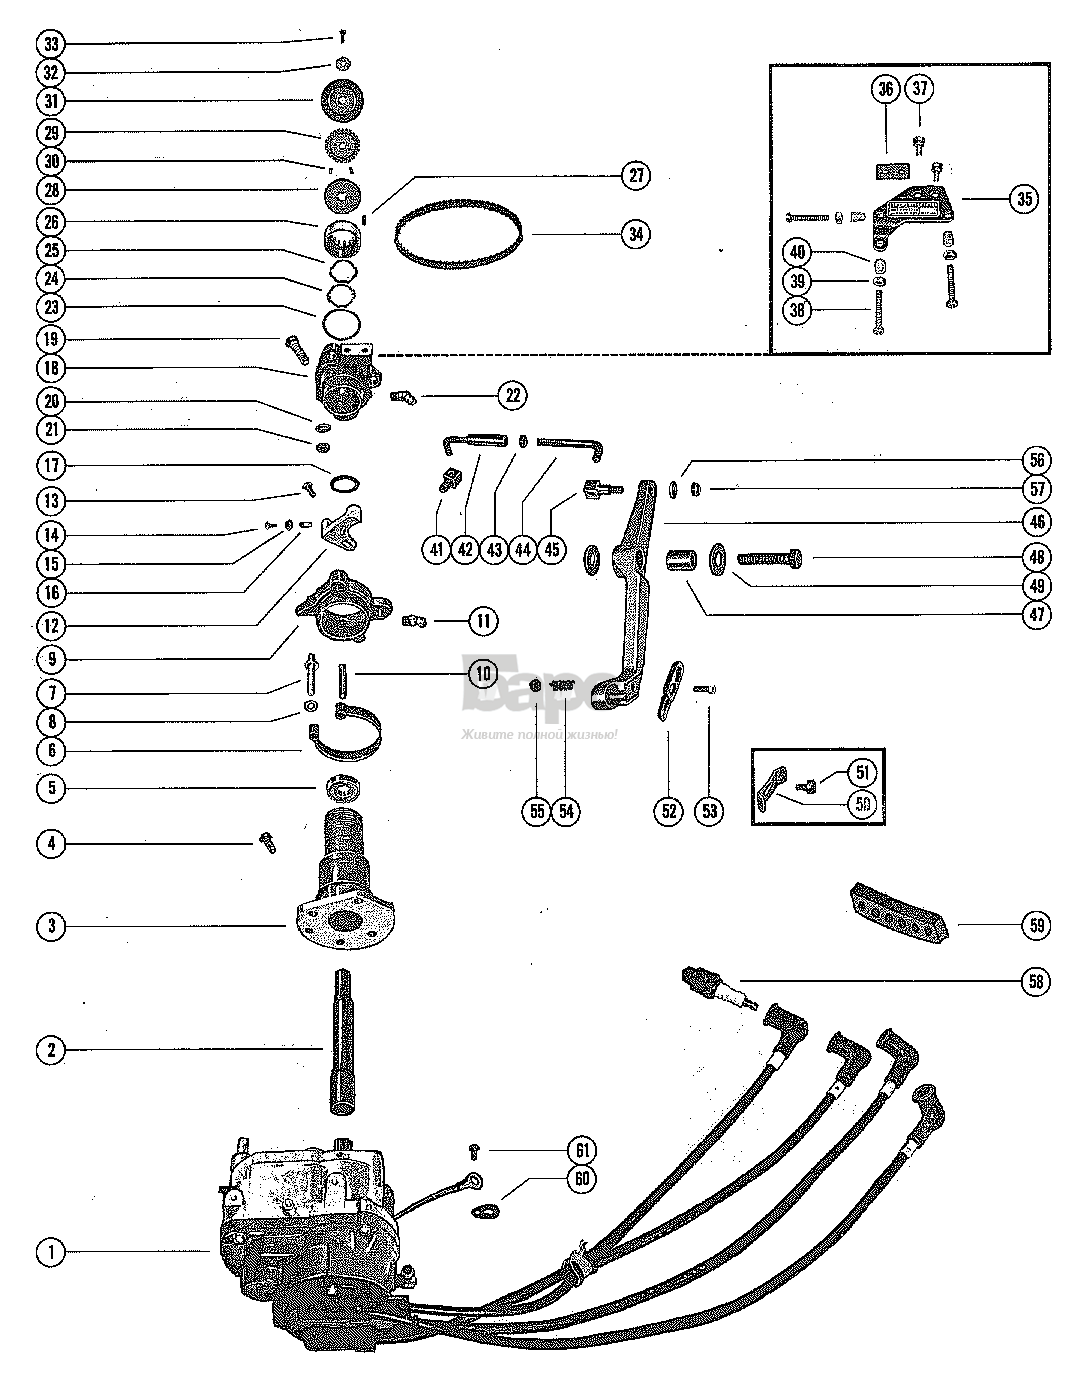 IGNITION DRIVER AND PILOT ASSEMBLY